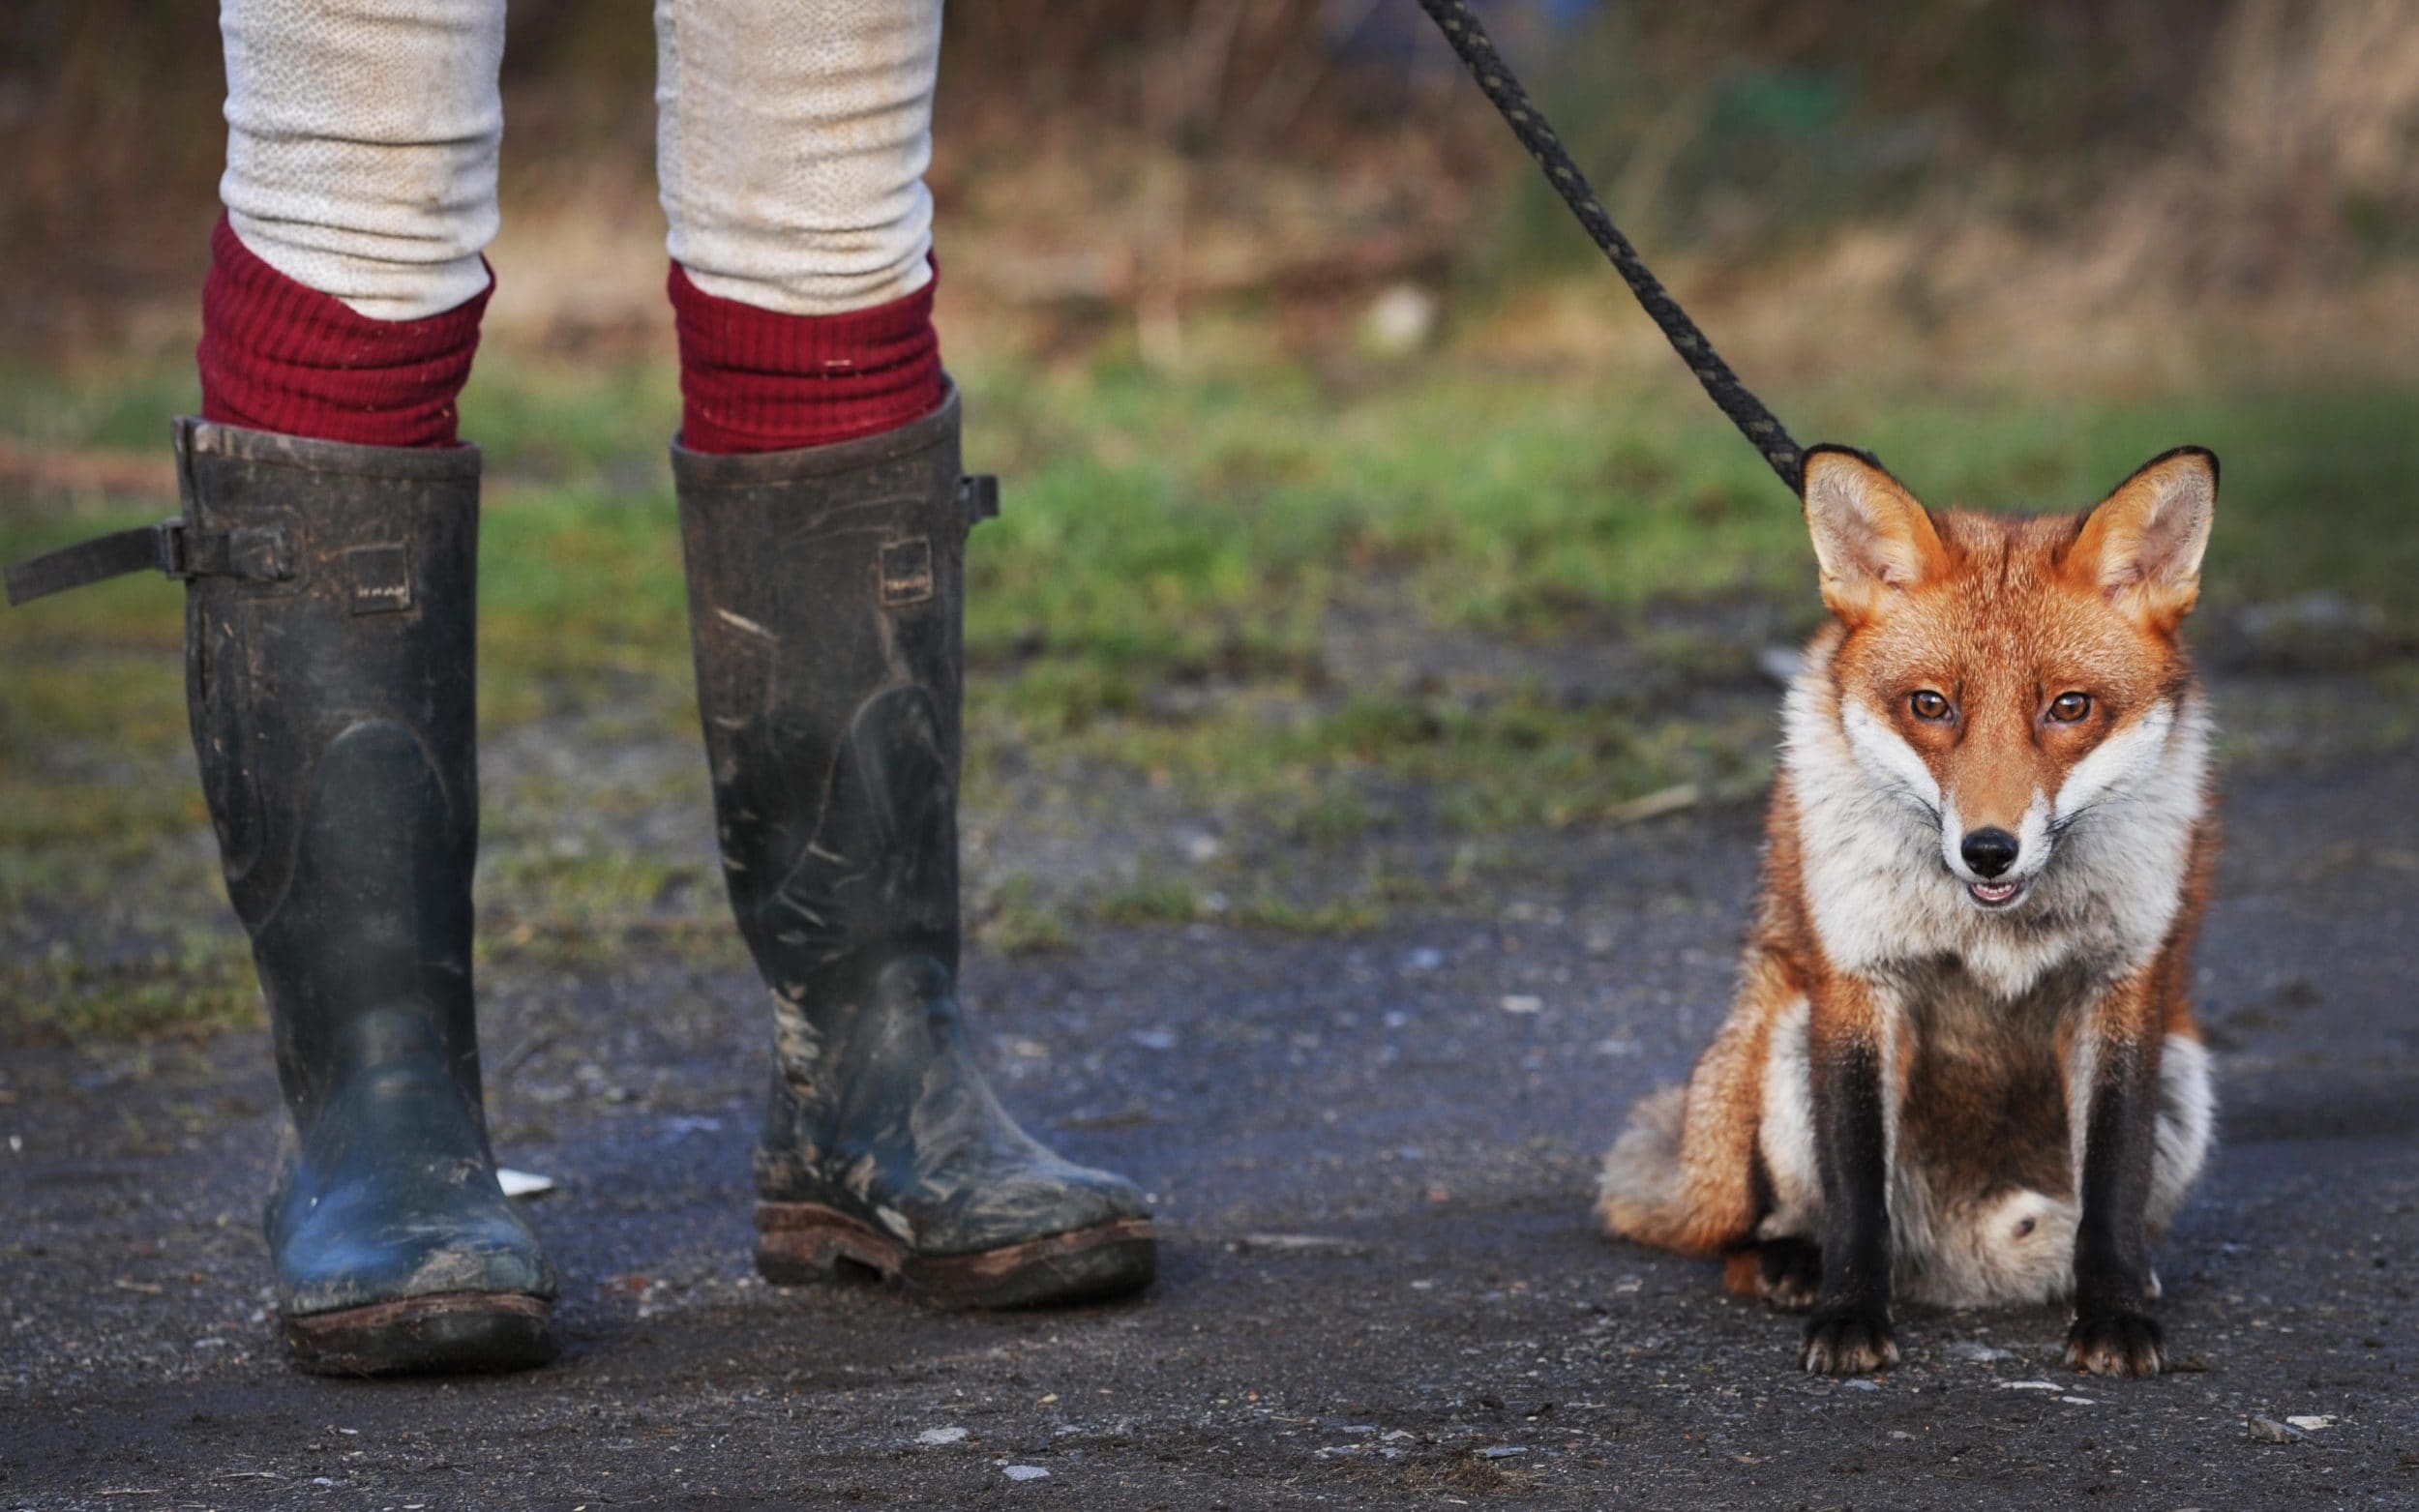 people once kept foxes as pets, new discovery suggests